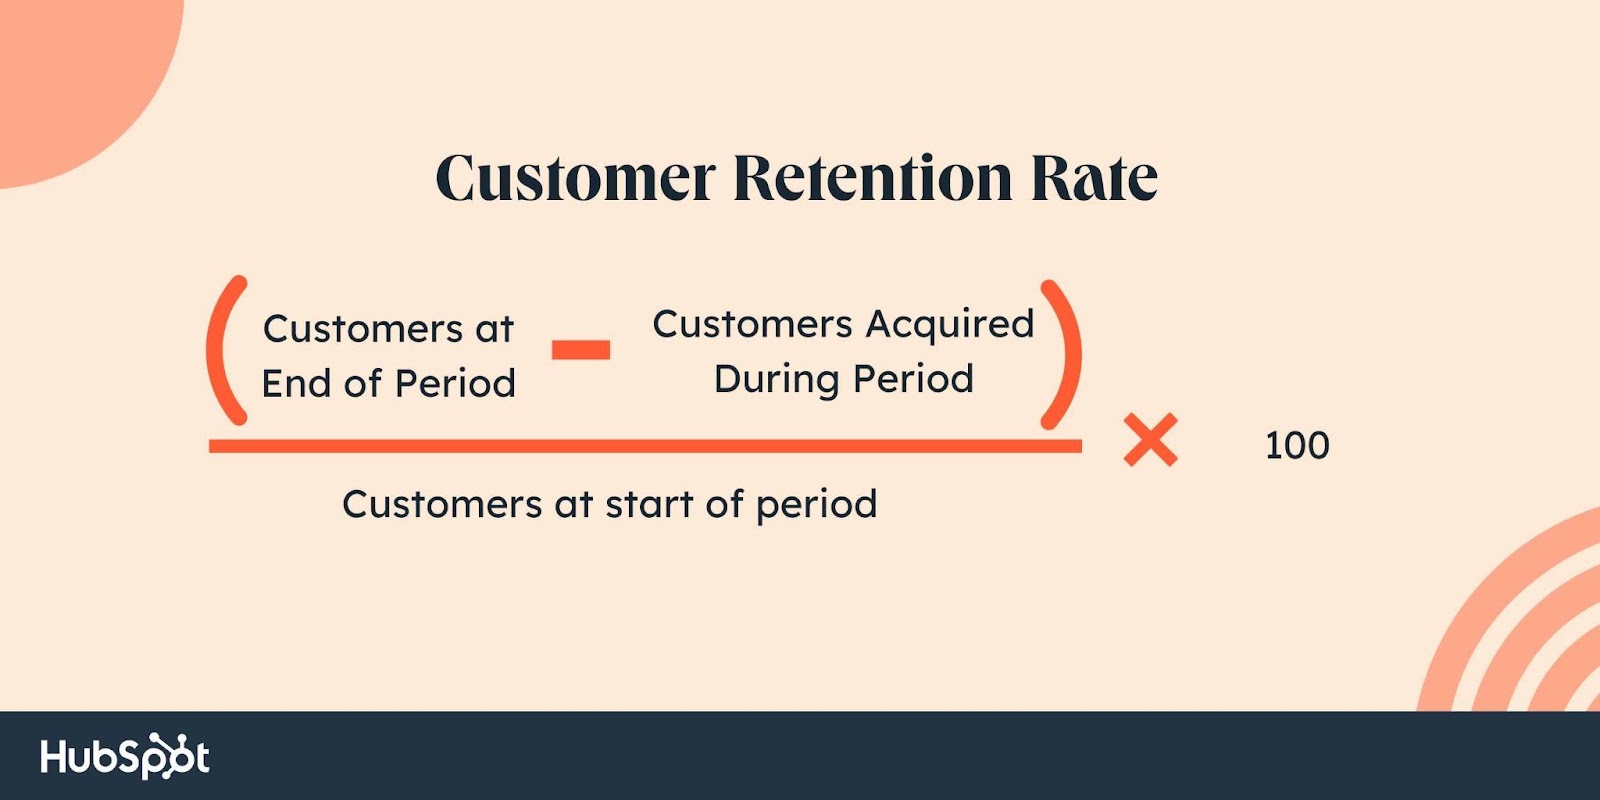 customer success in SaaS metric, CRR. (customers at end of period - customers acquired during period) / costumes at start of period x 100.